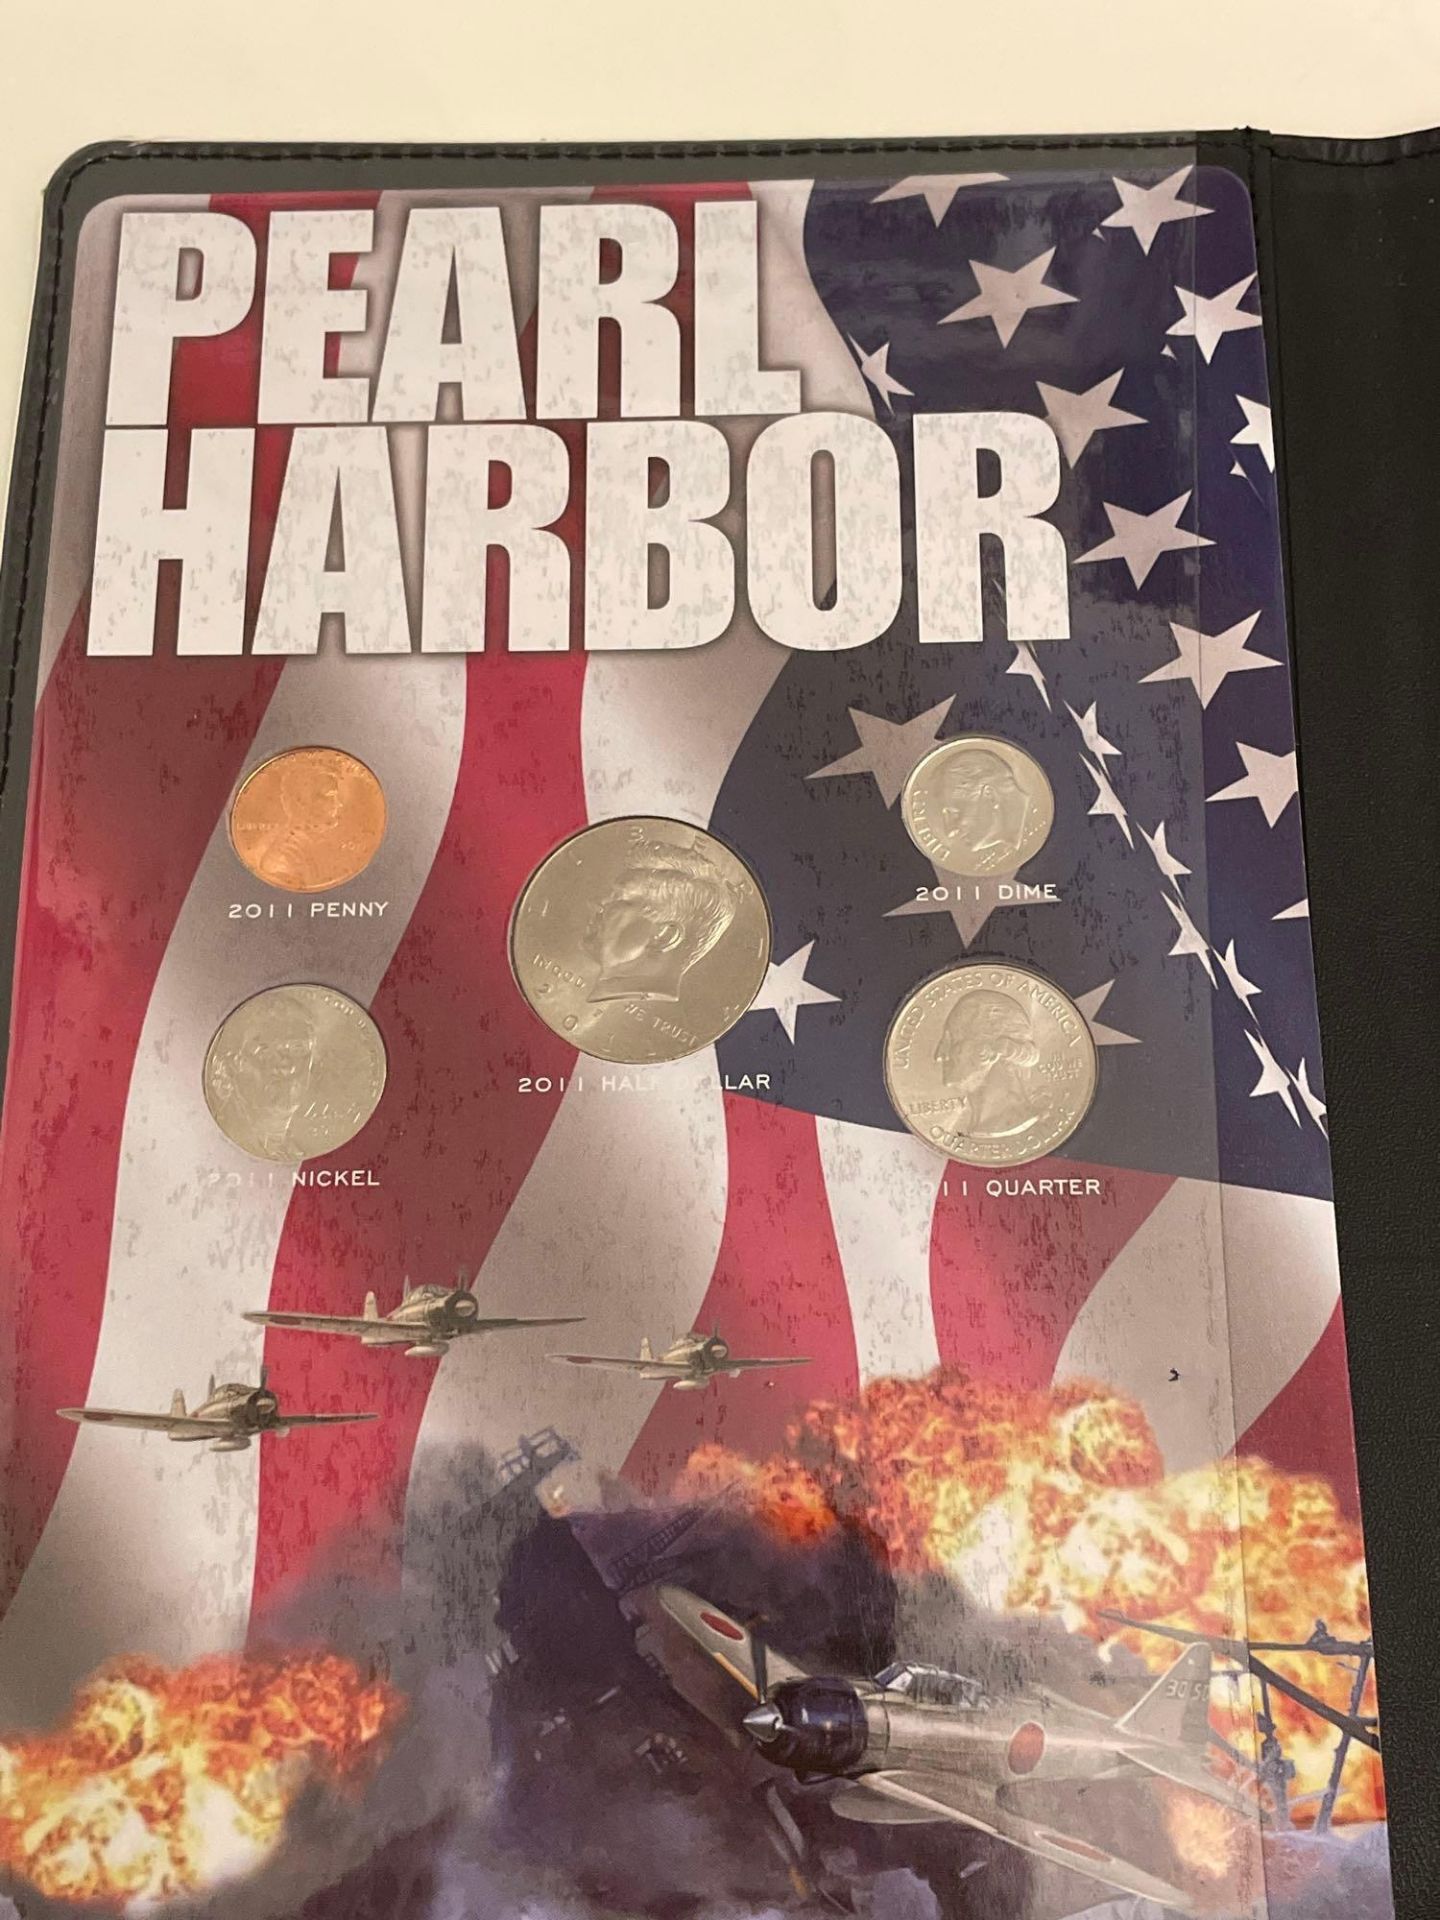 Pearl Harbor 70th Anniversary Coin set: 1941-2011 - Image 4 of 5